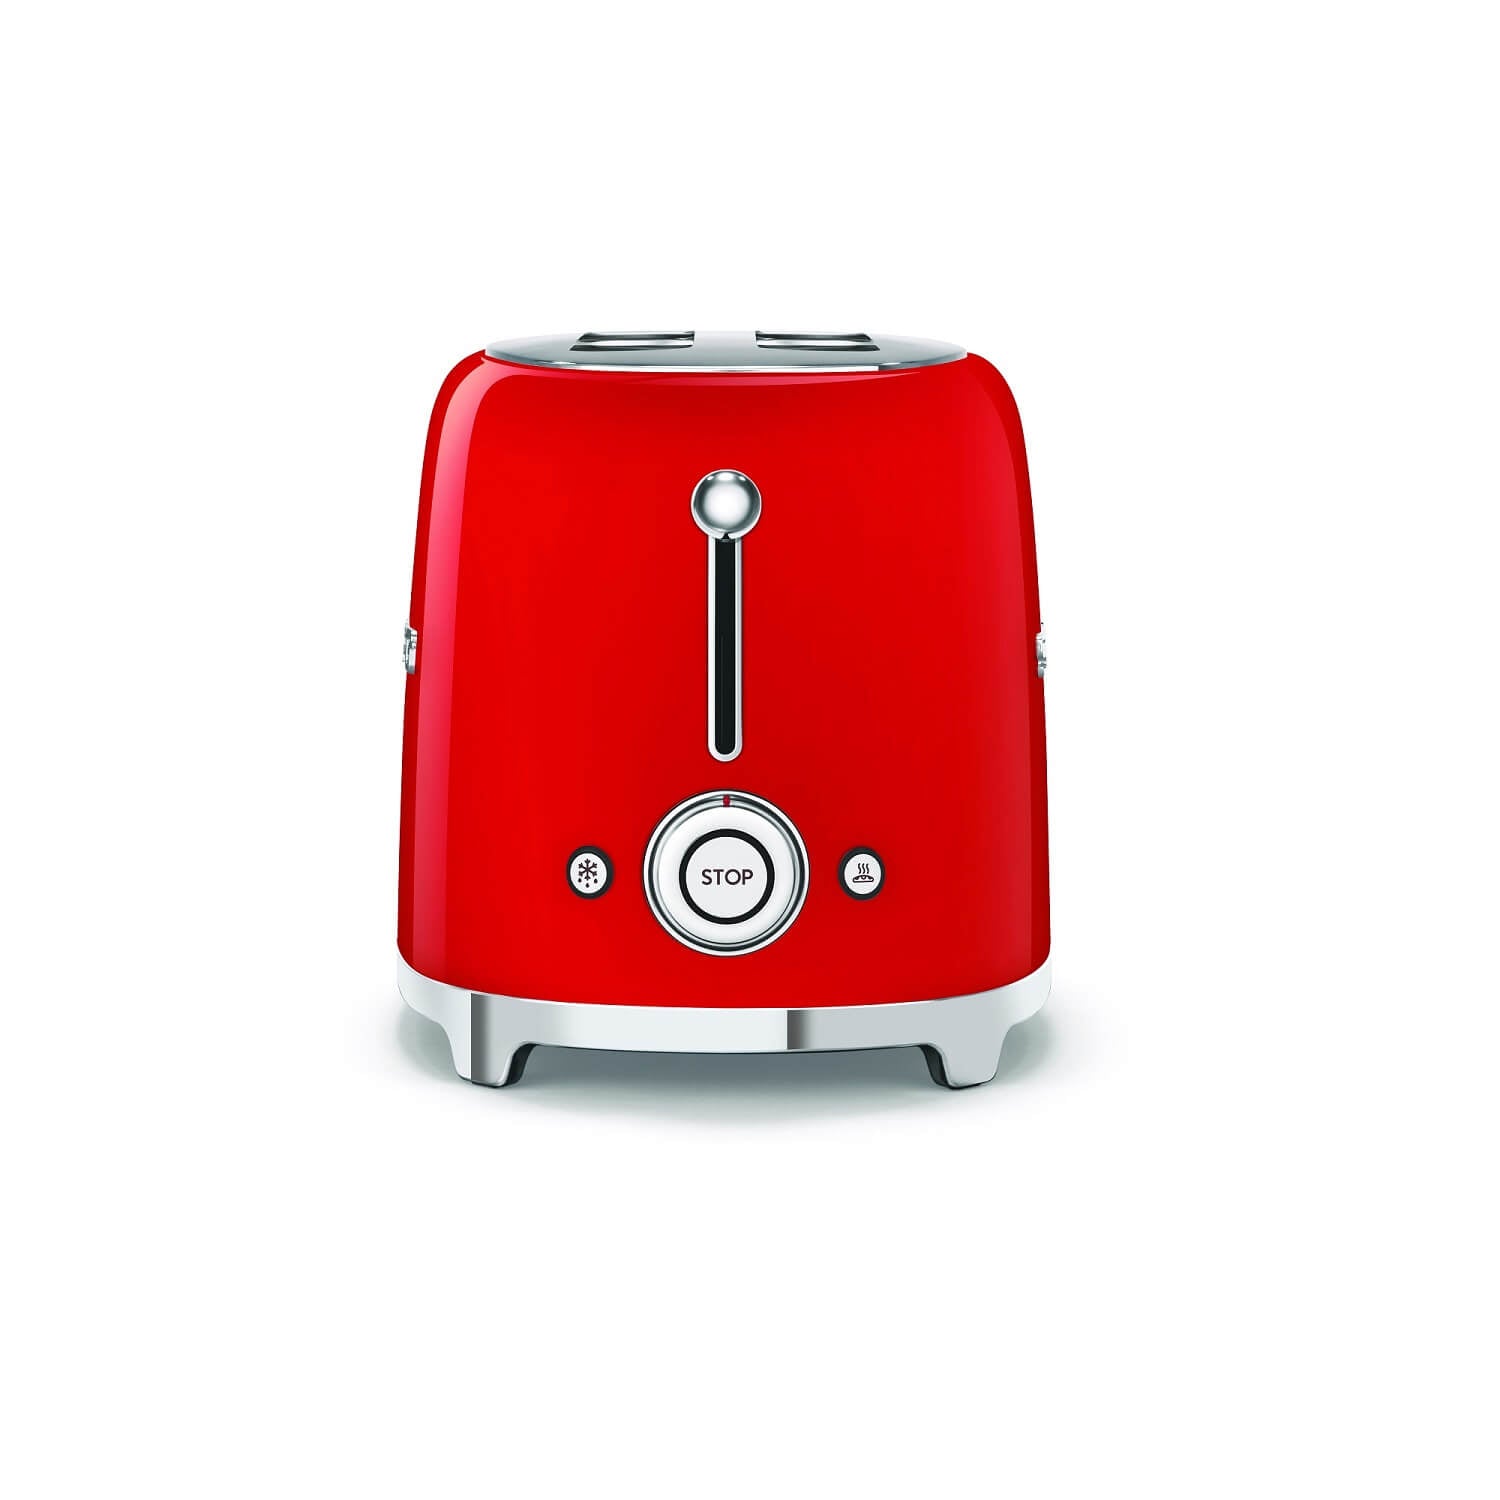 SMEG 50's Style 2 Slice Toaster - Red Color